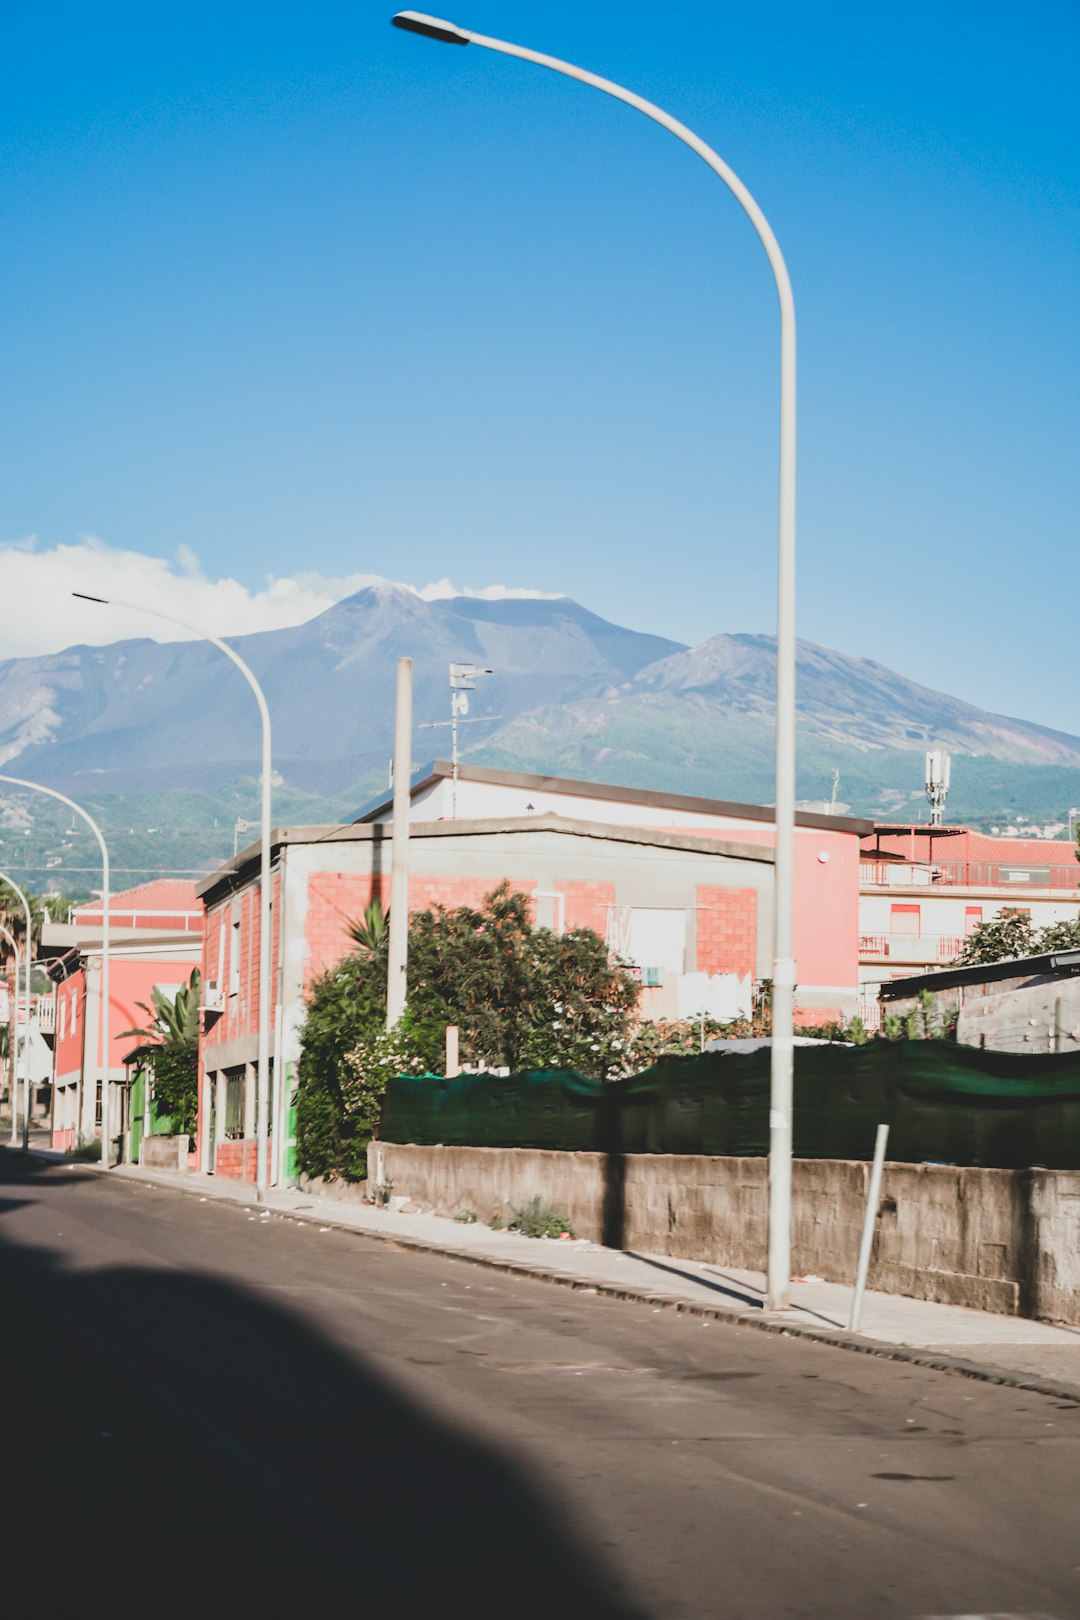 travelers stories about Town in Mount Etna, Italy